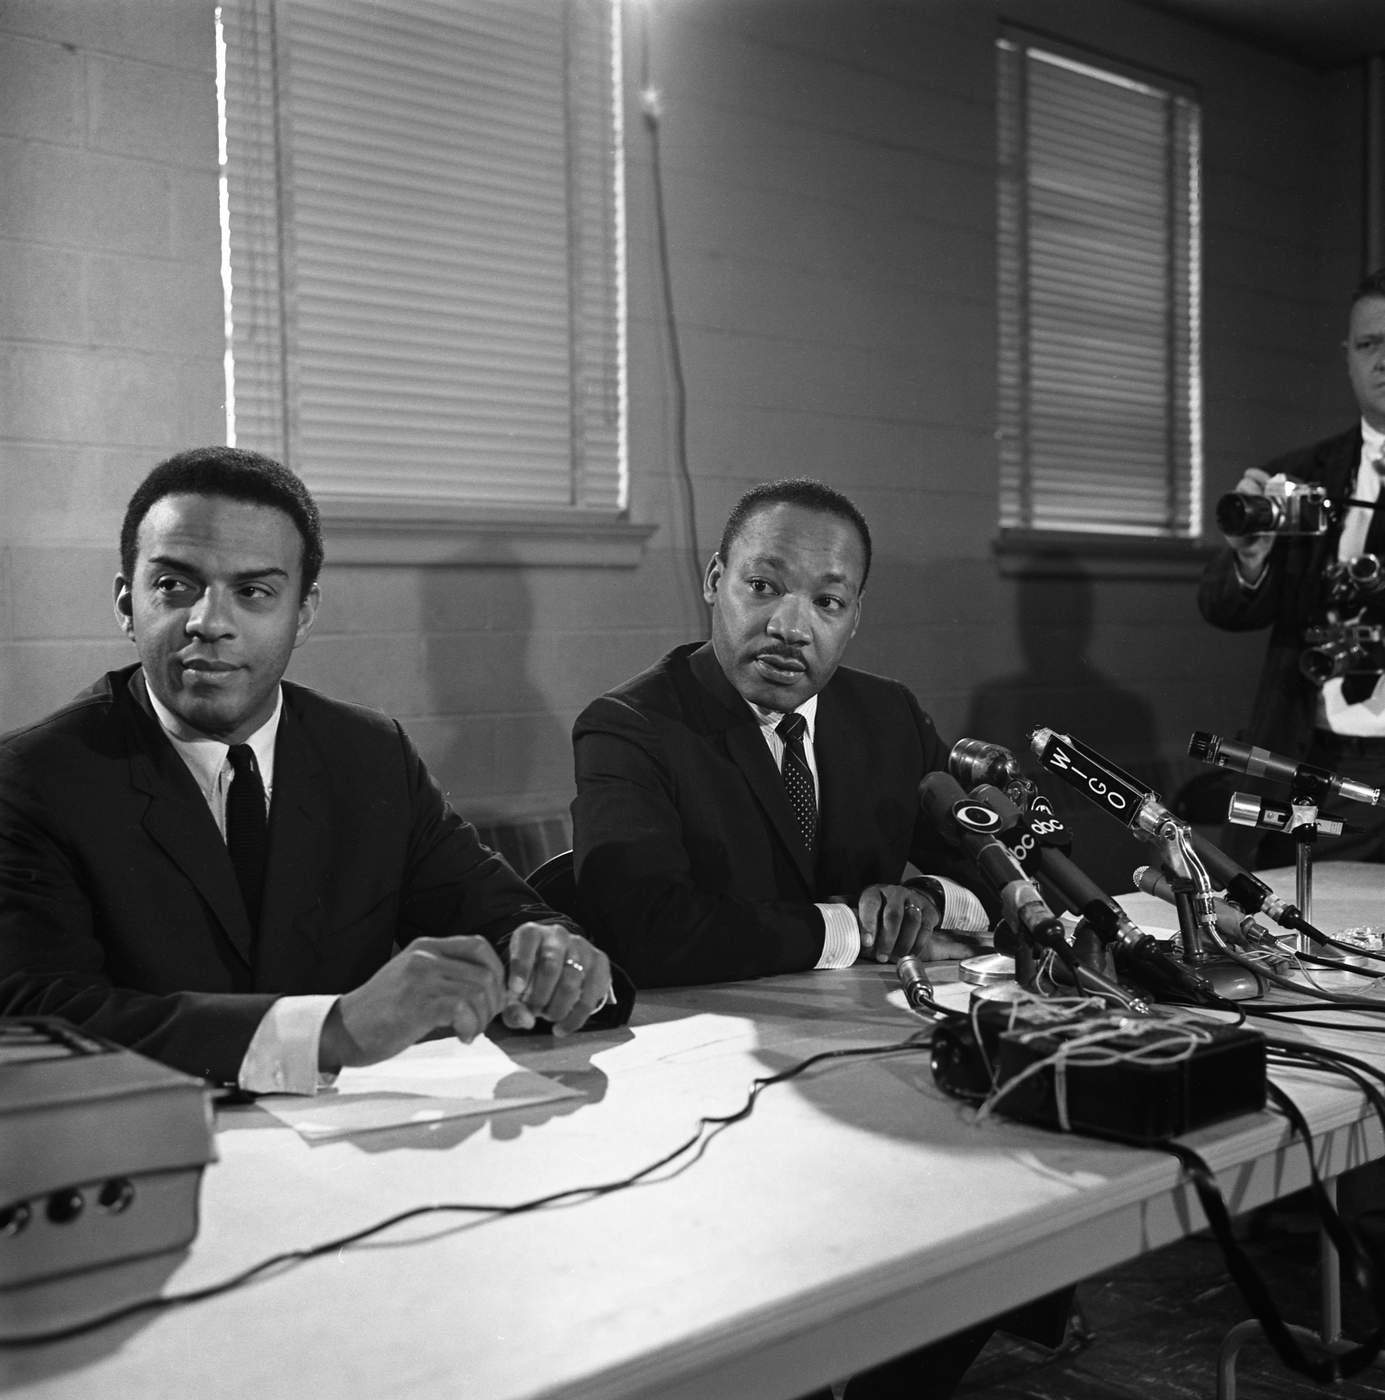 SCLC director Andrew Young and Martin Luther King Jr. during a press conference in April 1967